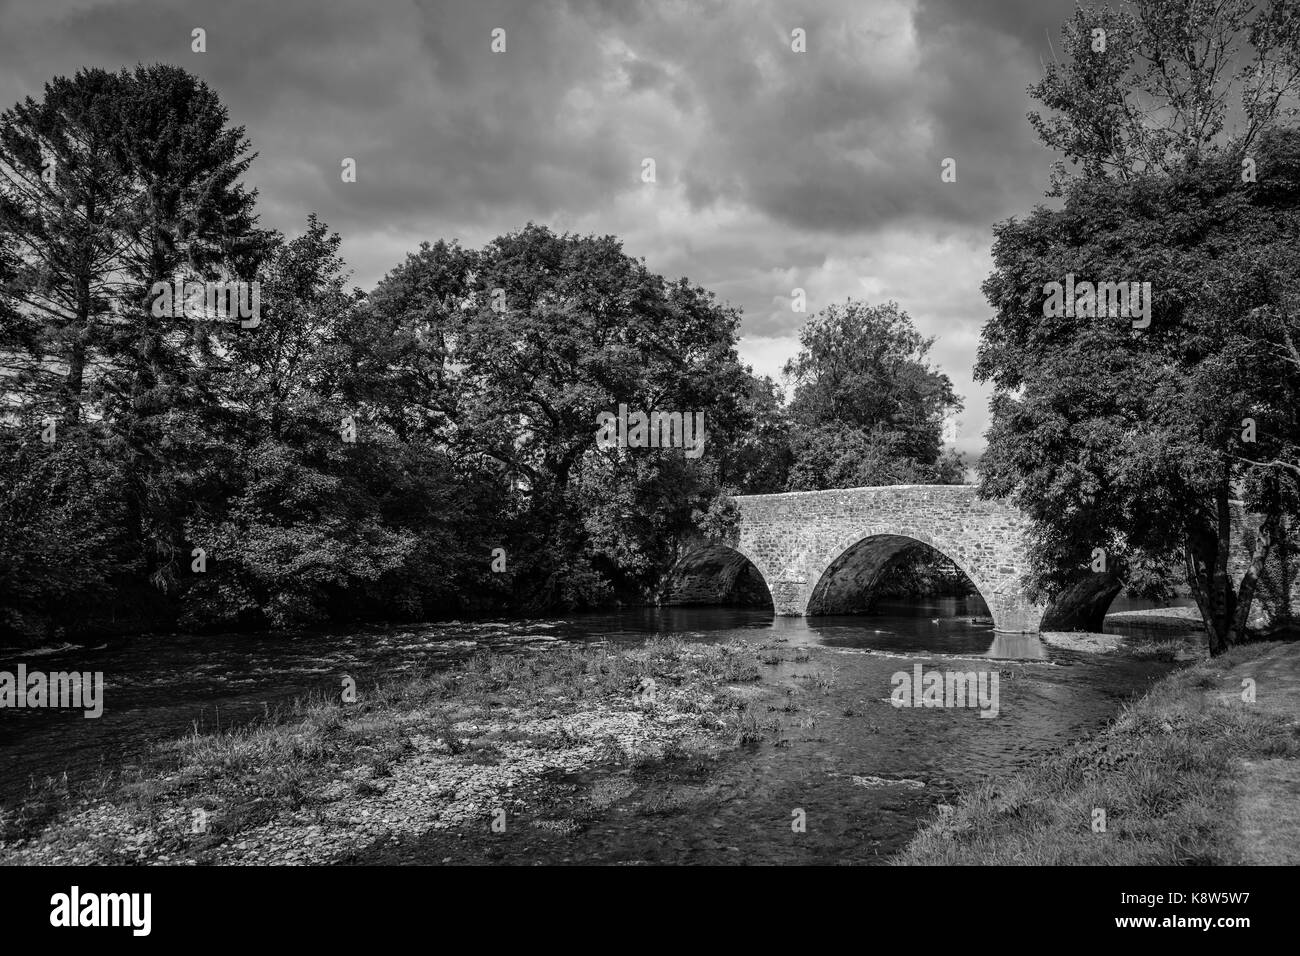 View of the Bridge over the River Exe, Exebridge, a village on the border of Devon and Somerset, England at the confluence of the Barle and Exe rivers Stock Photo